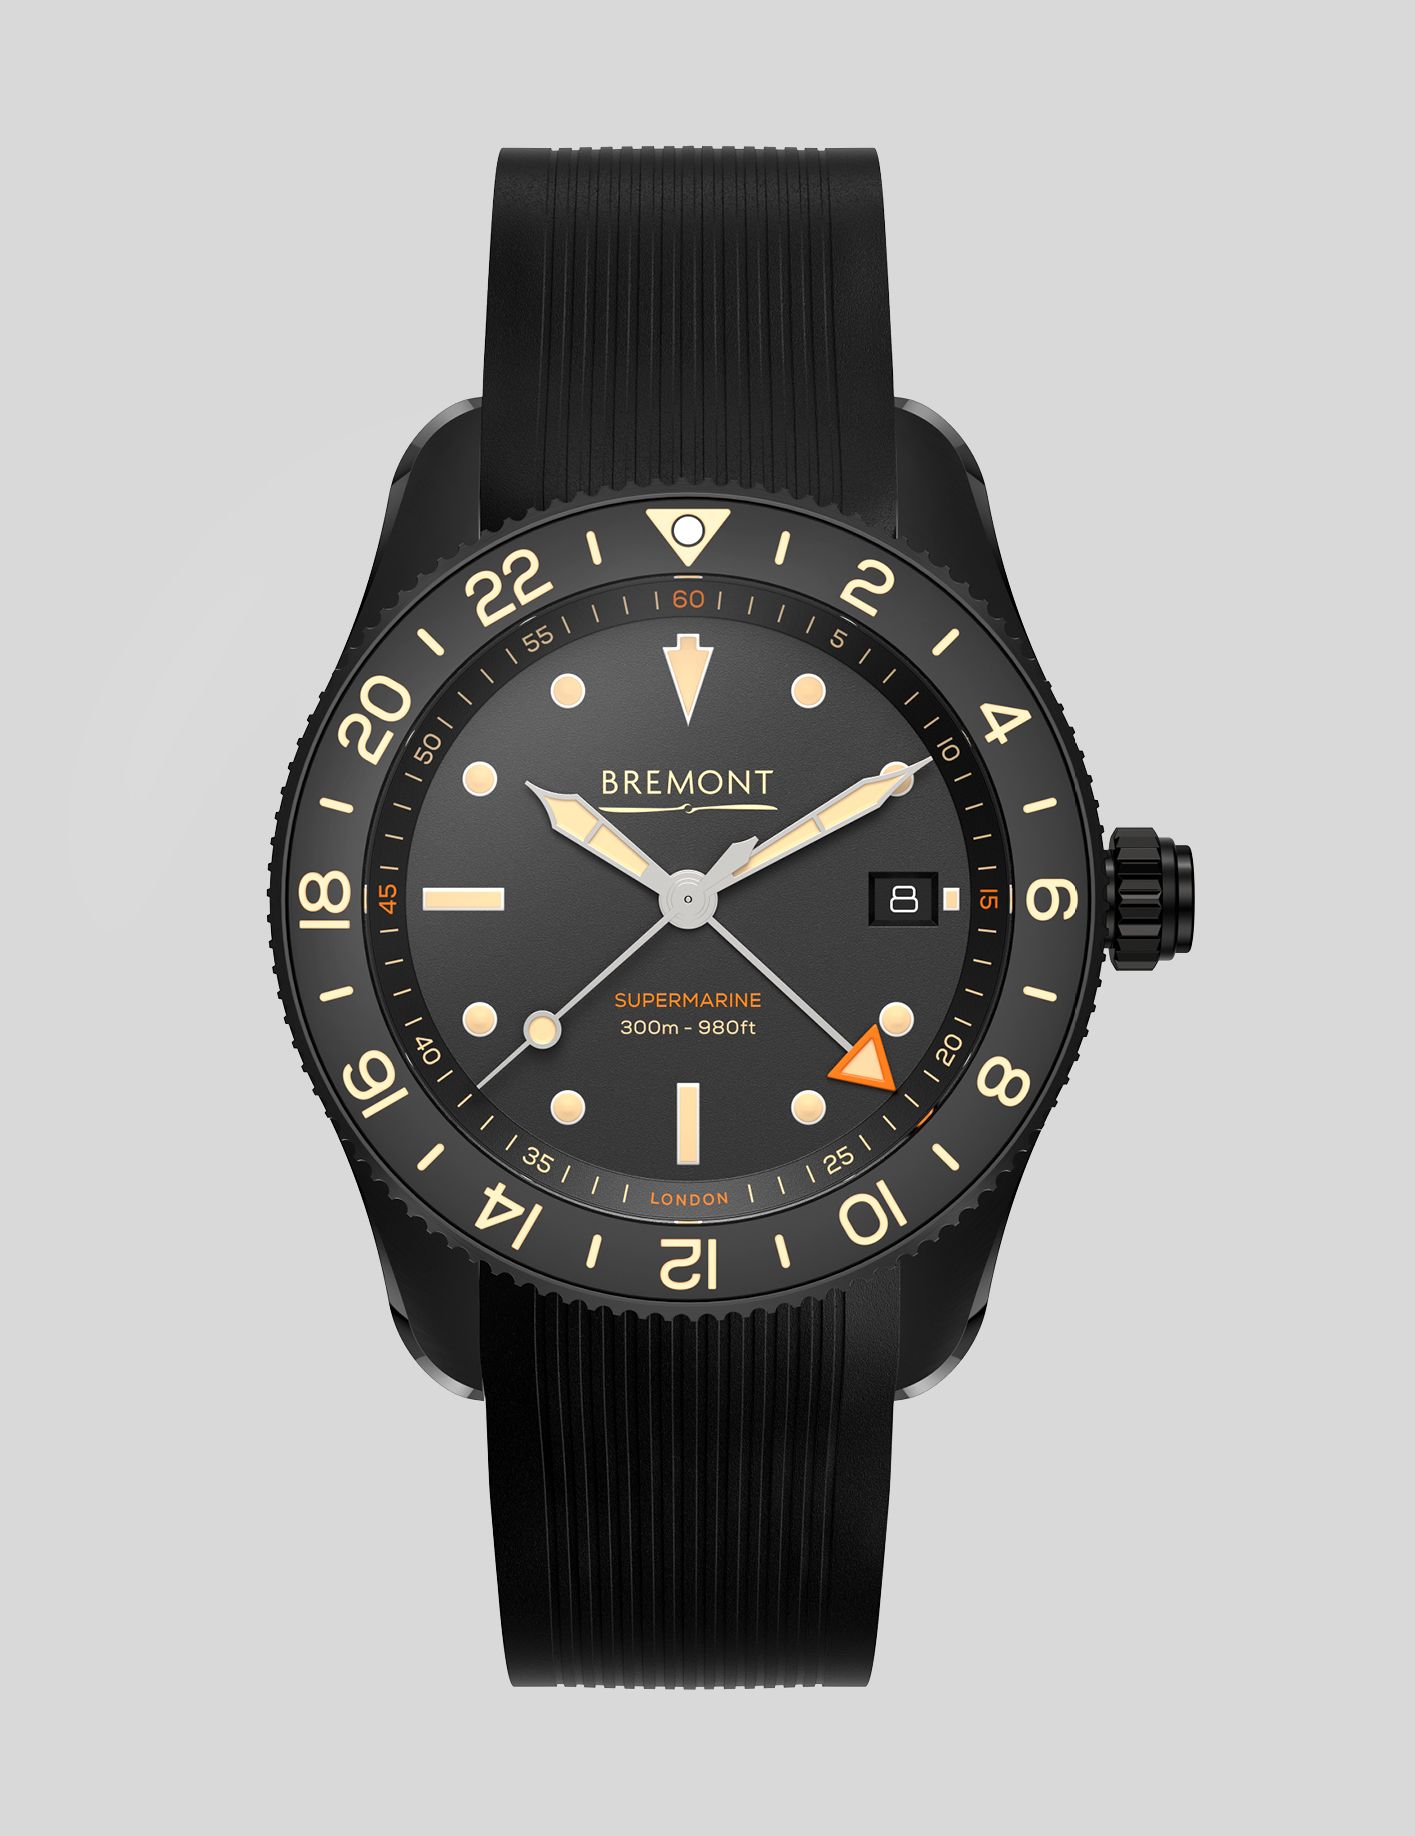 The all-black S302 Jet, £3,700, on a rubber strap